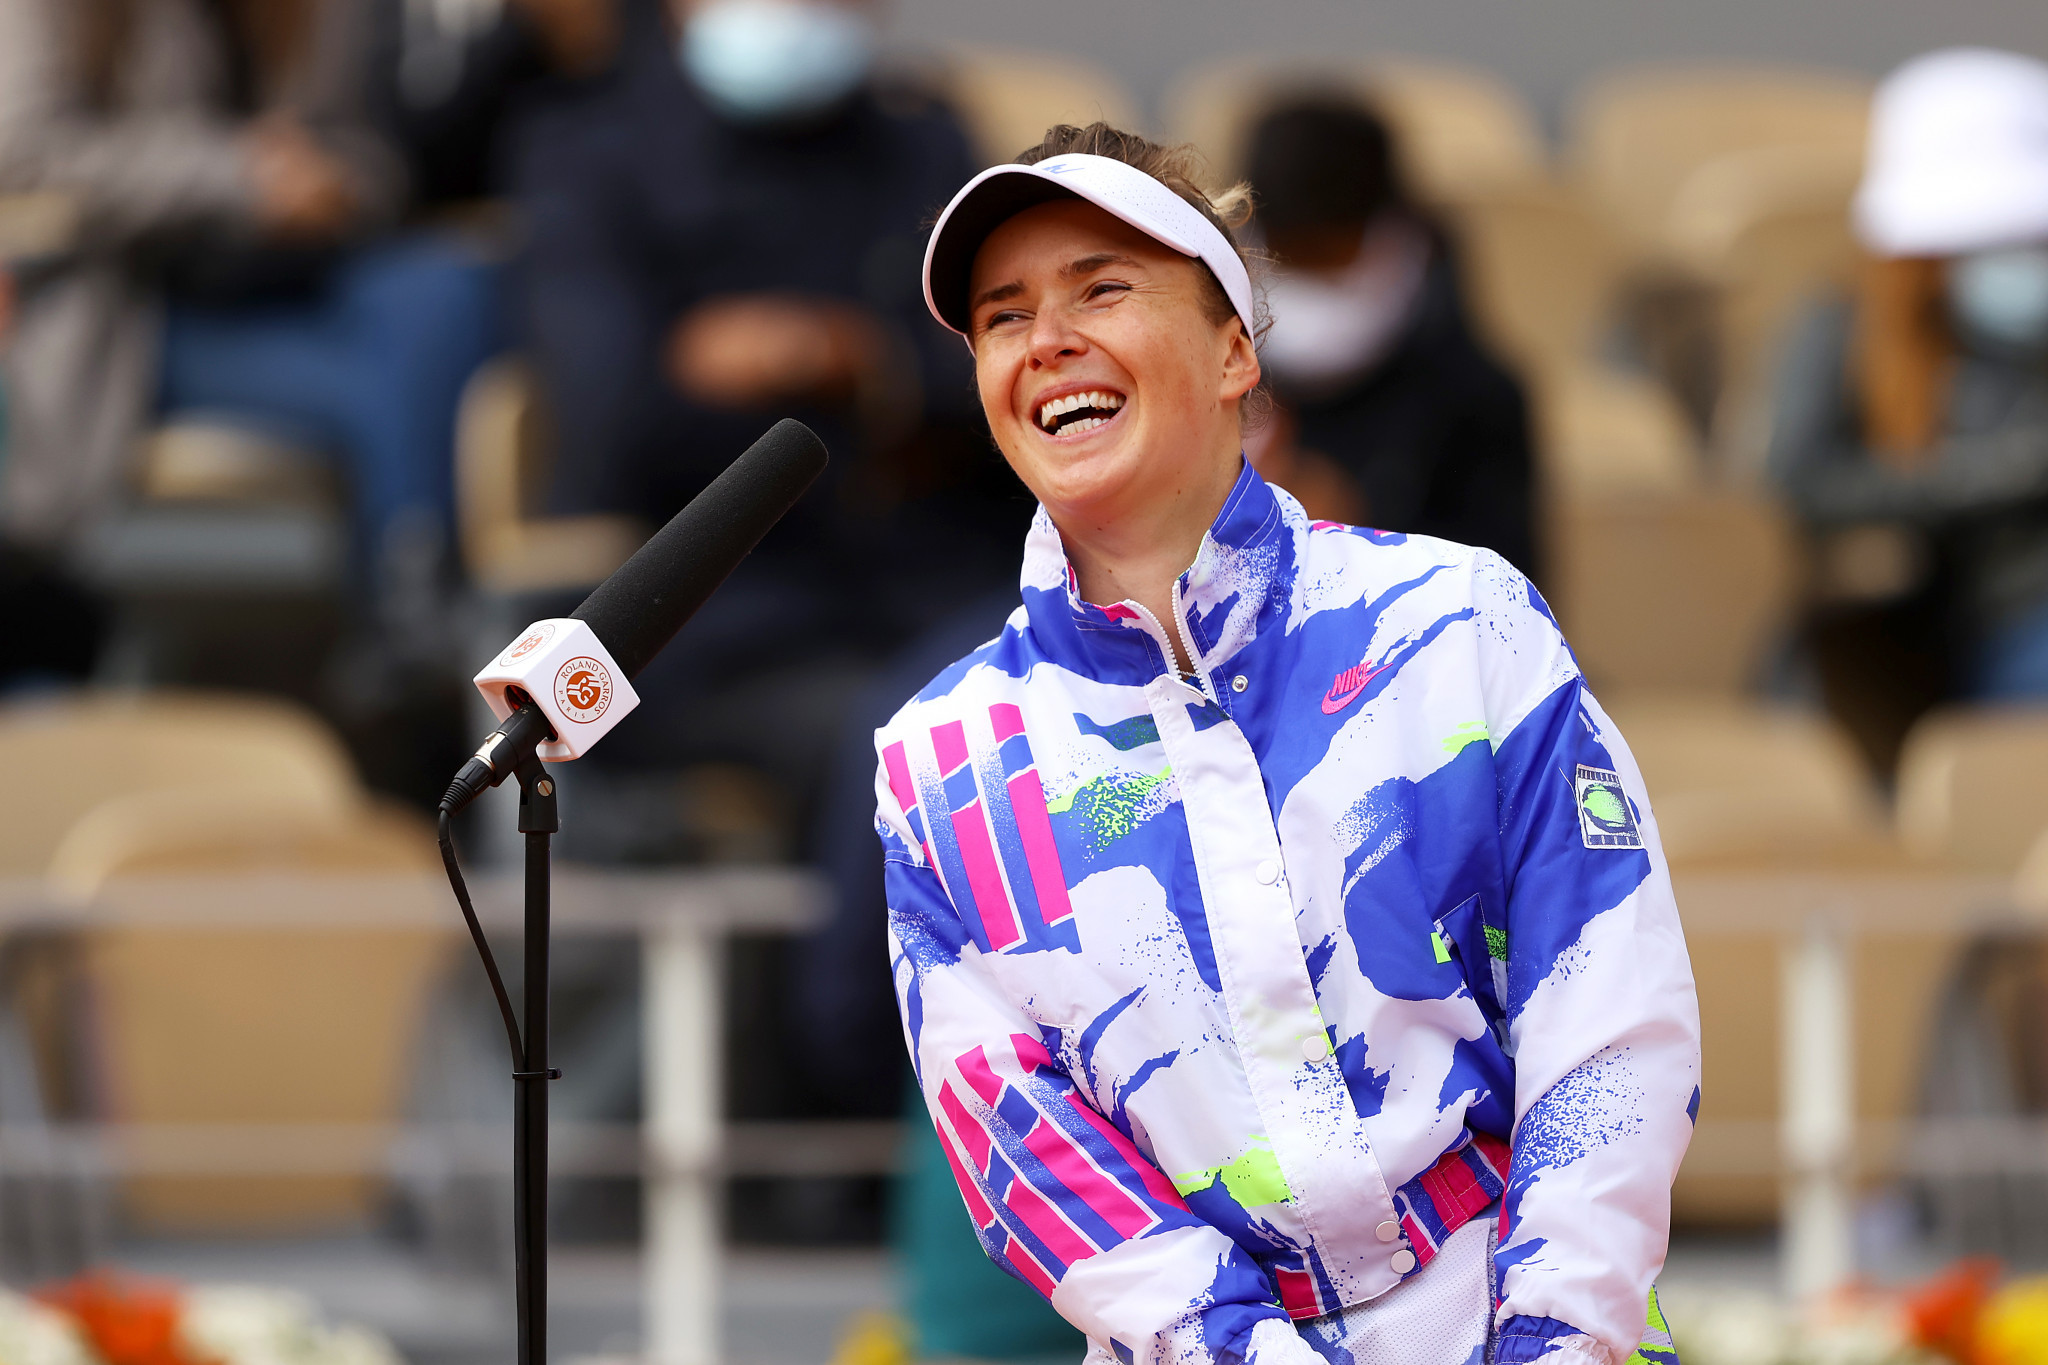 Third seed Elina Svitolina enjoys a giggle during her post-match interview after reaching the quarter-finals ©Getty Images